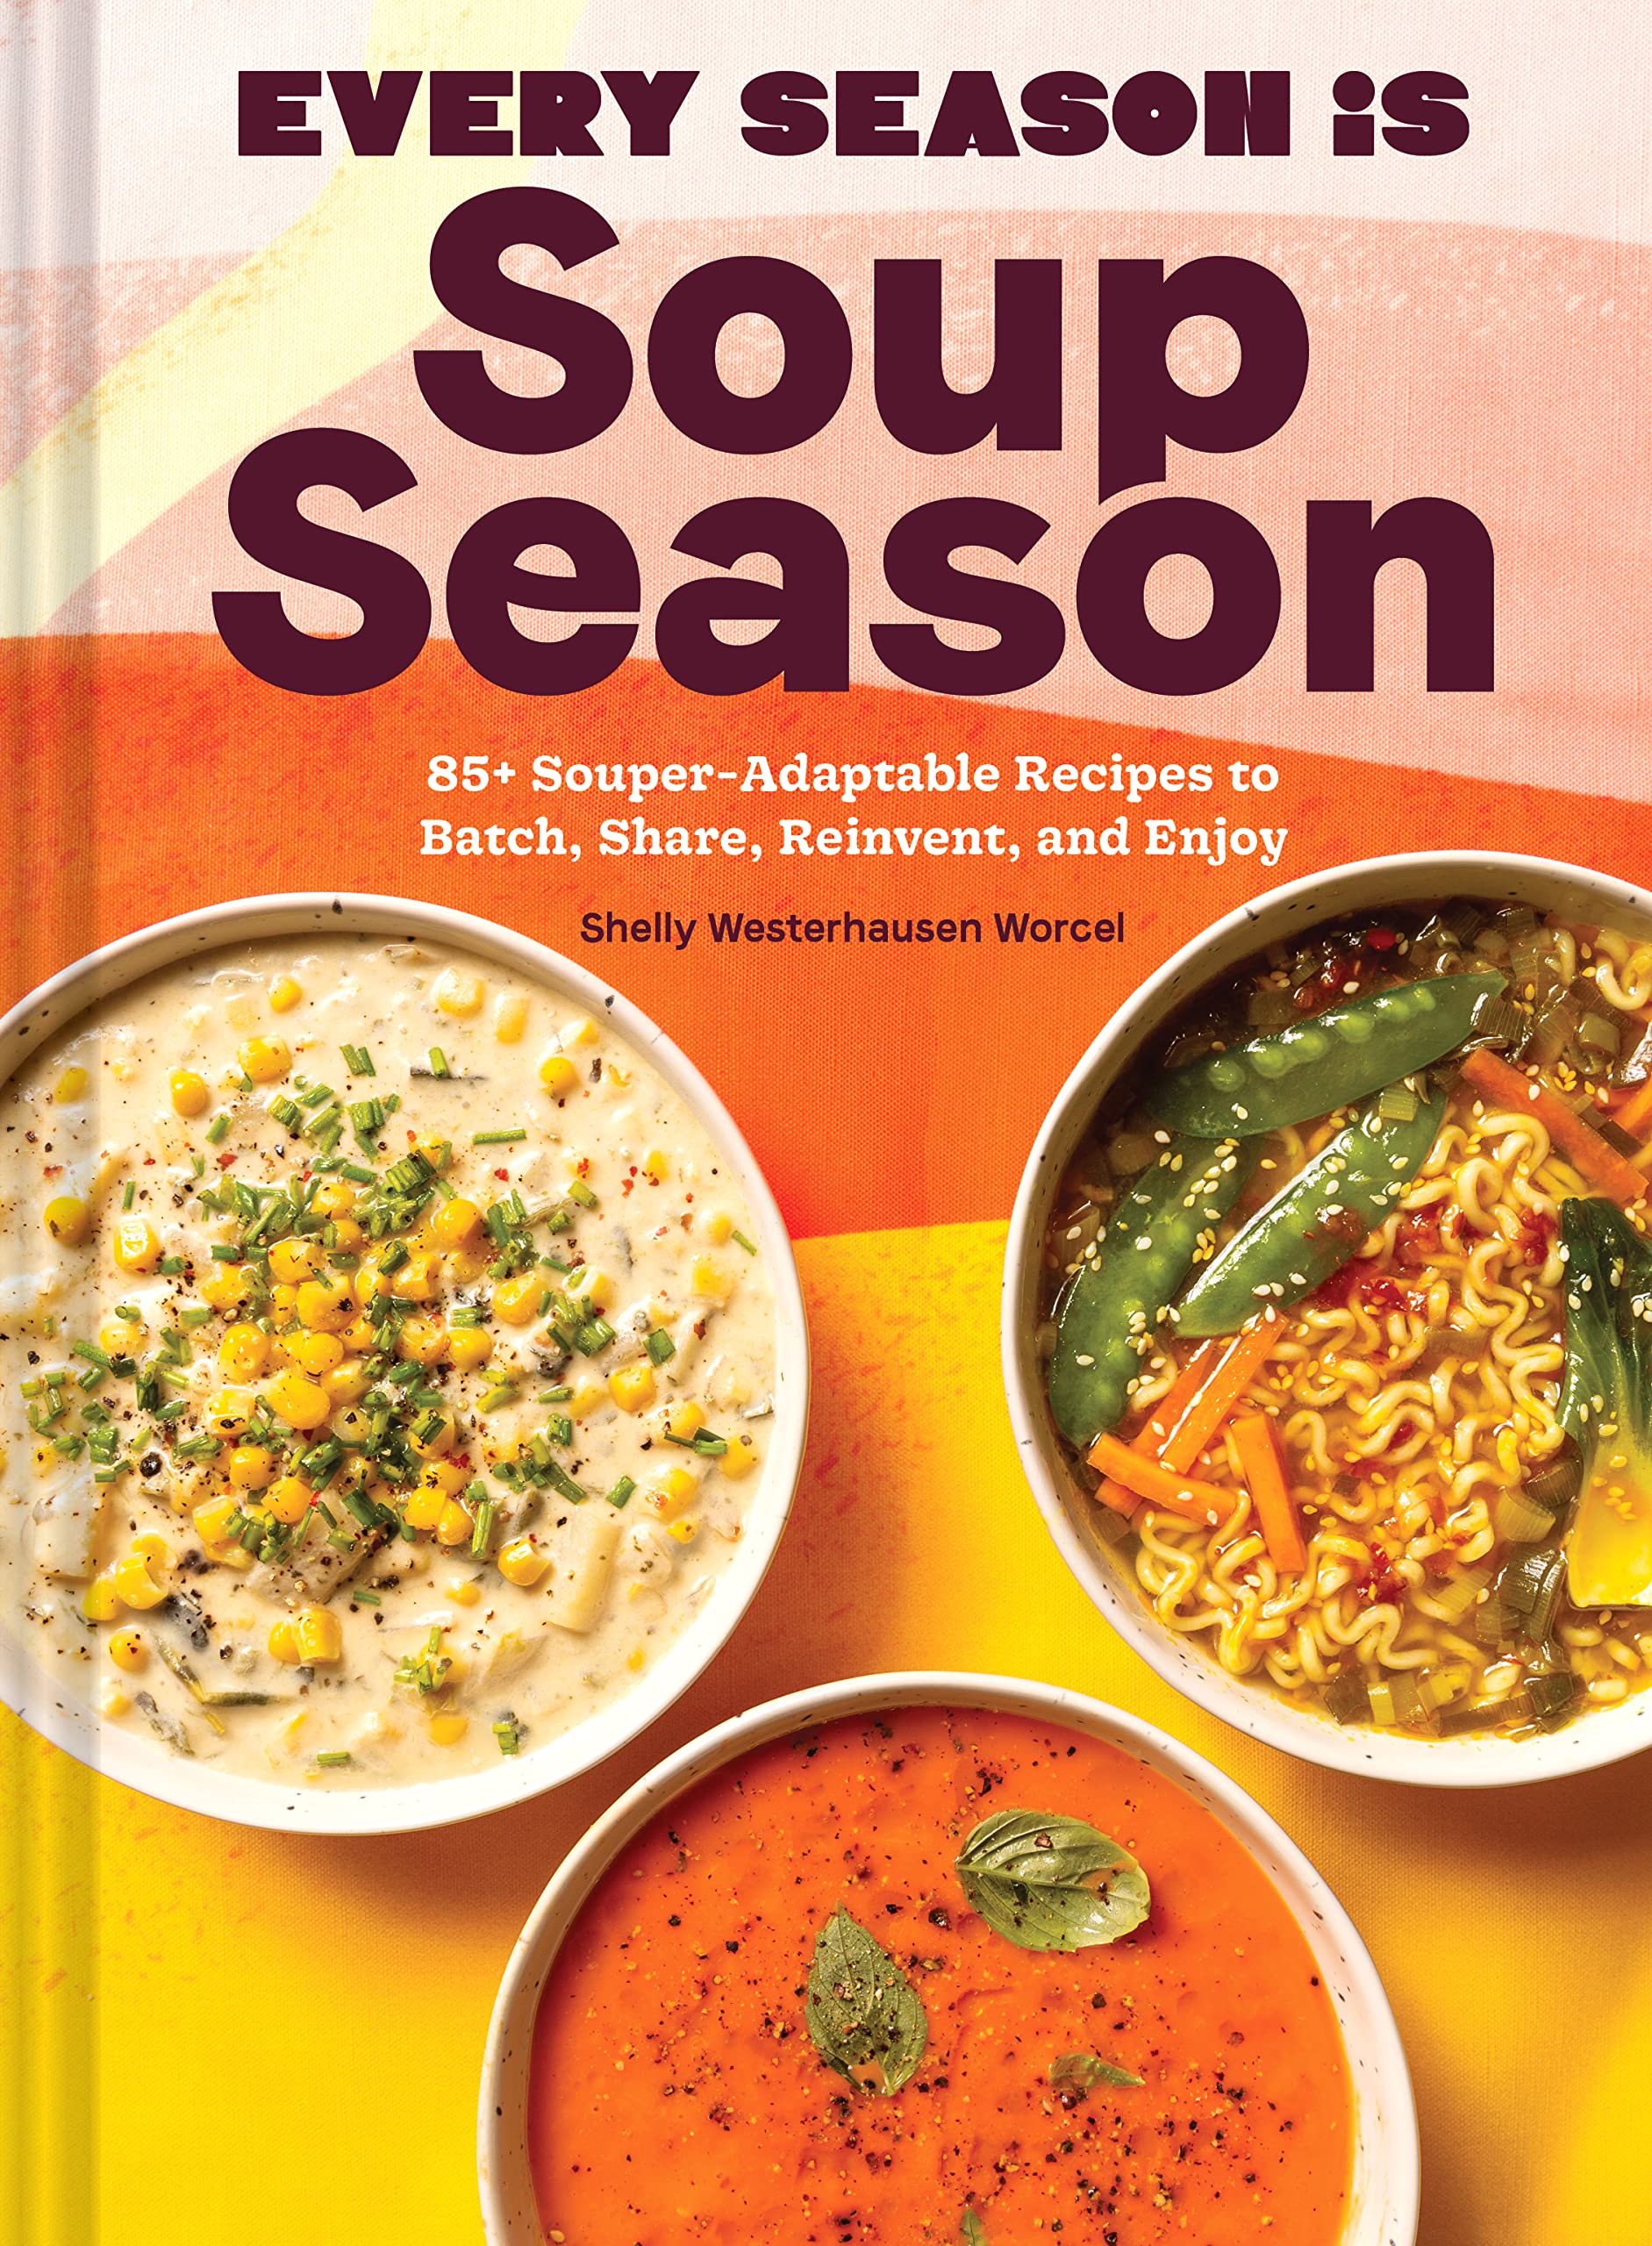 Every Season Is Soup Season: 85+ Souper-Adaptable Recipes to Batch, Share, Reinvent, and Enjoy (Shelly Westerhausen Worcel)